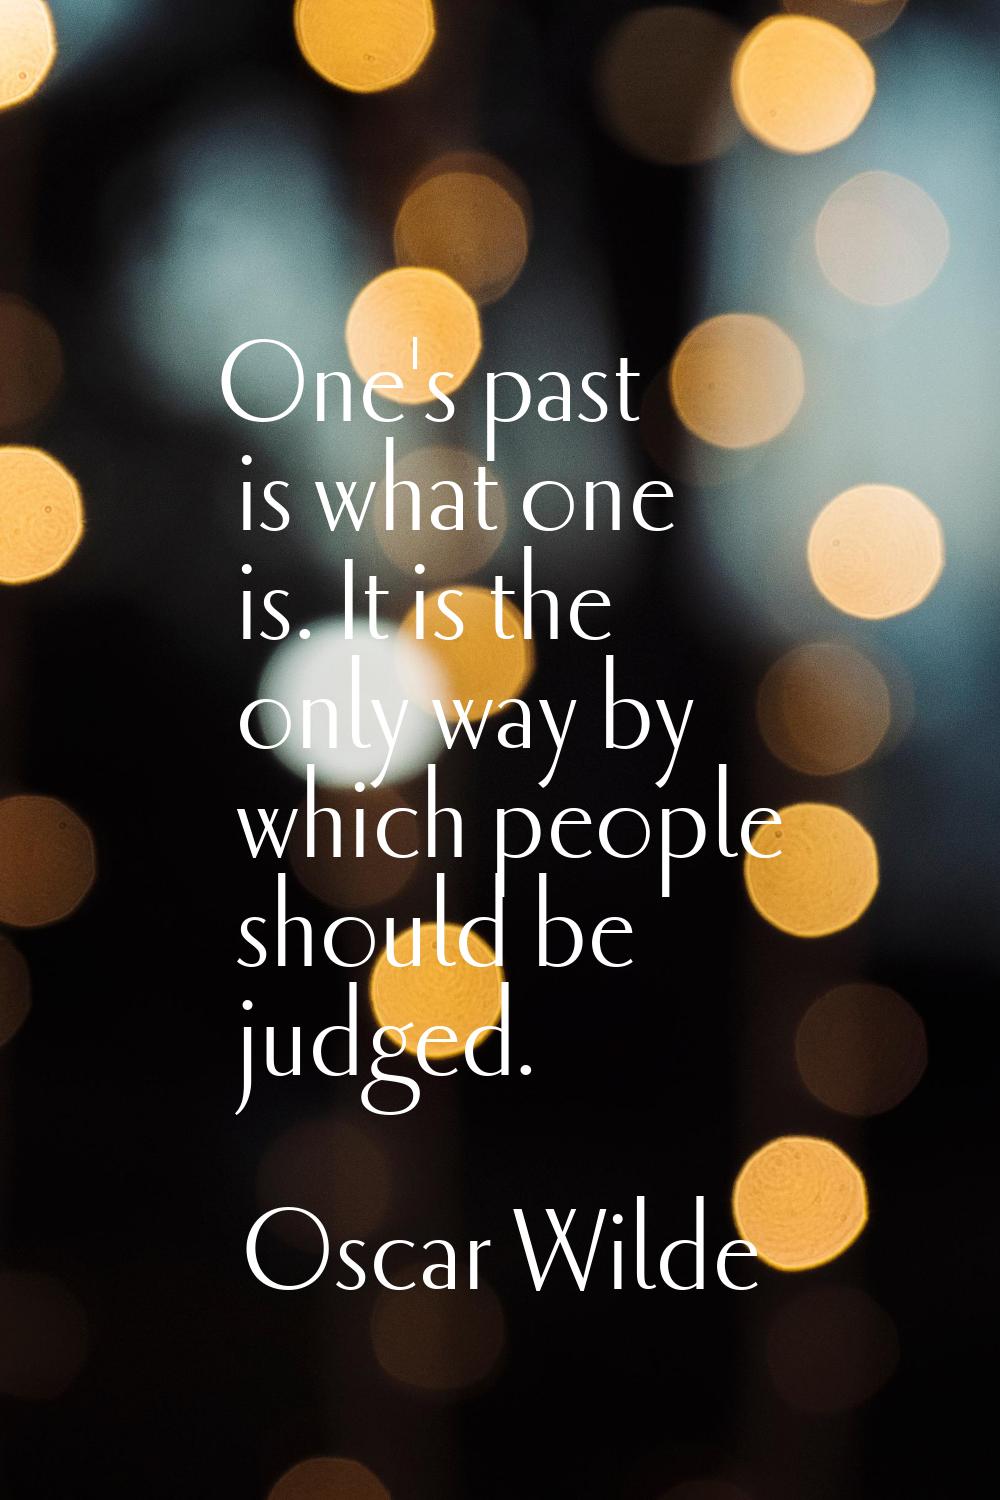 One's past is what one is. It is the only way by which people should be judged.